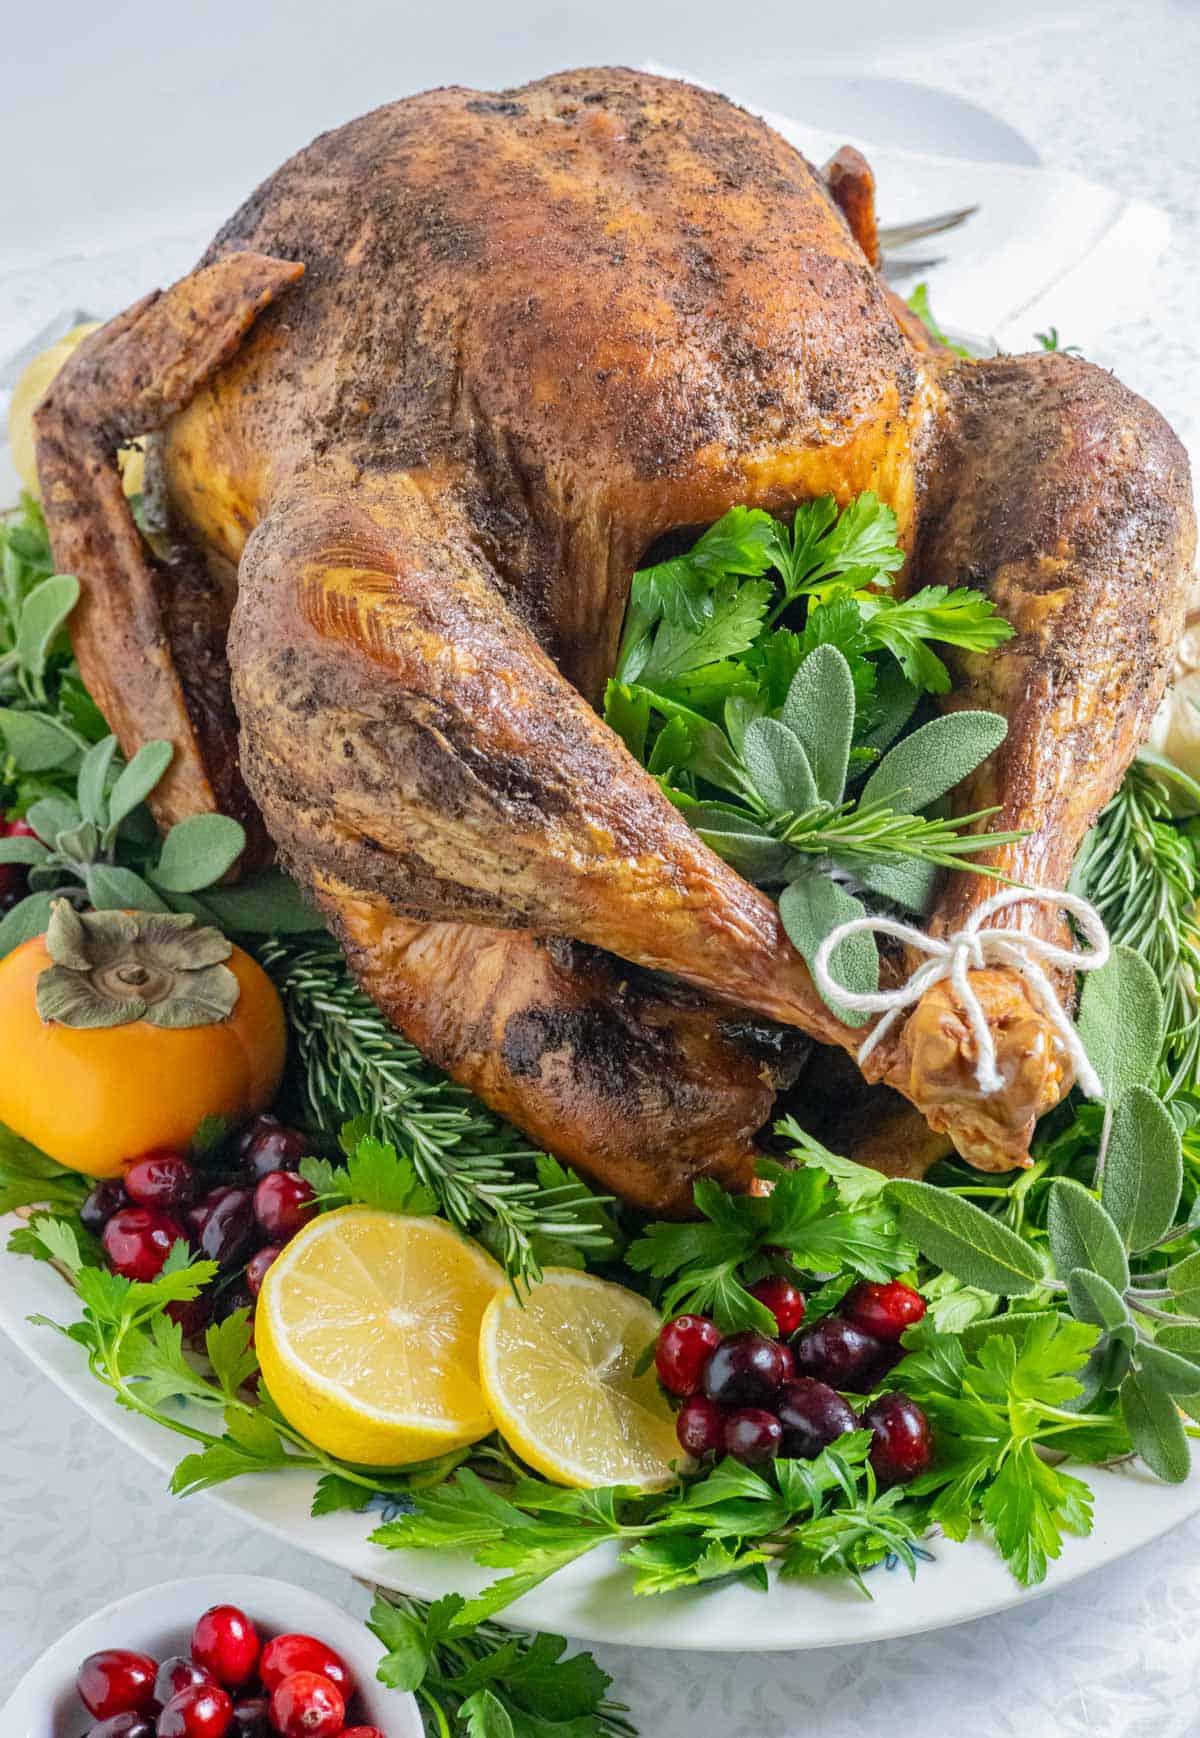 How To Cook a Turkey (in a Convection Oven) Recipe